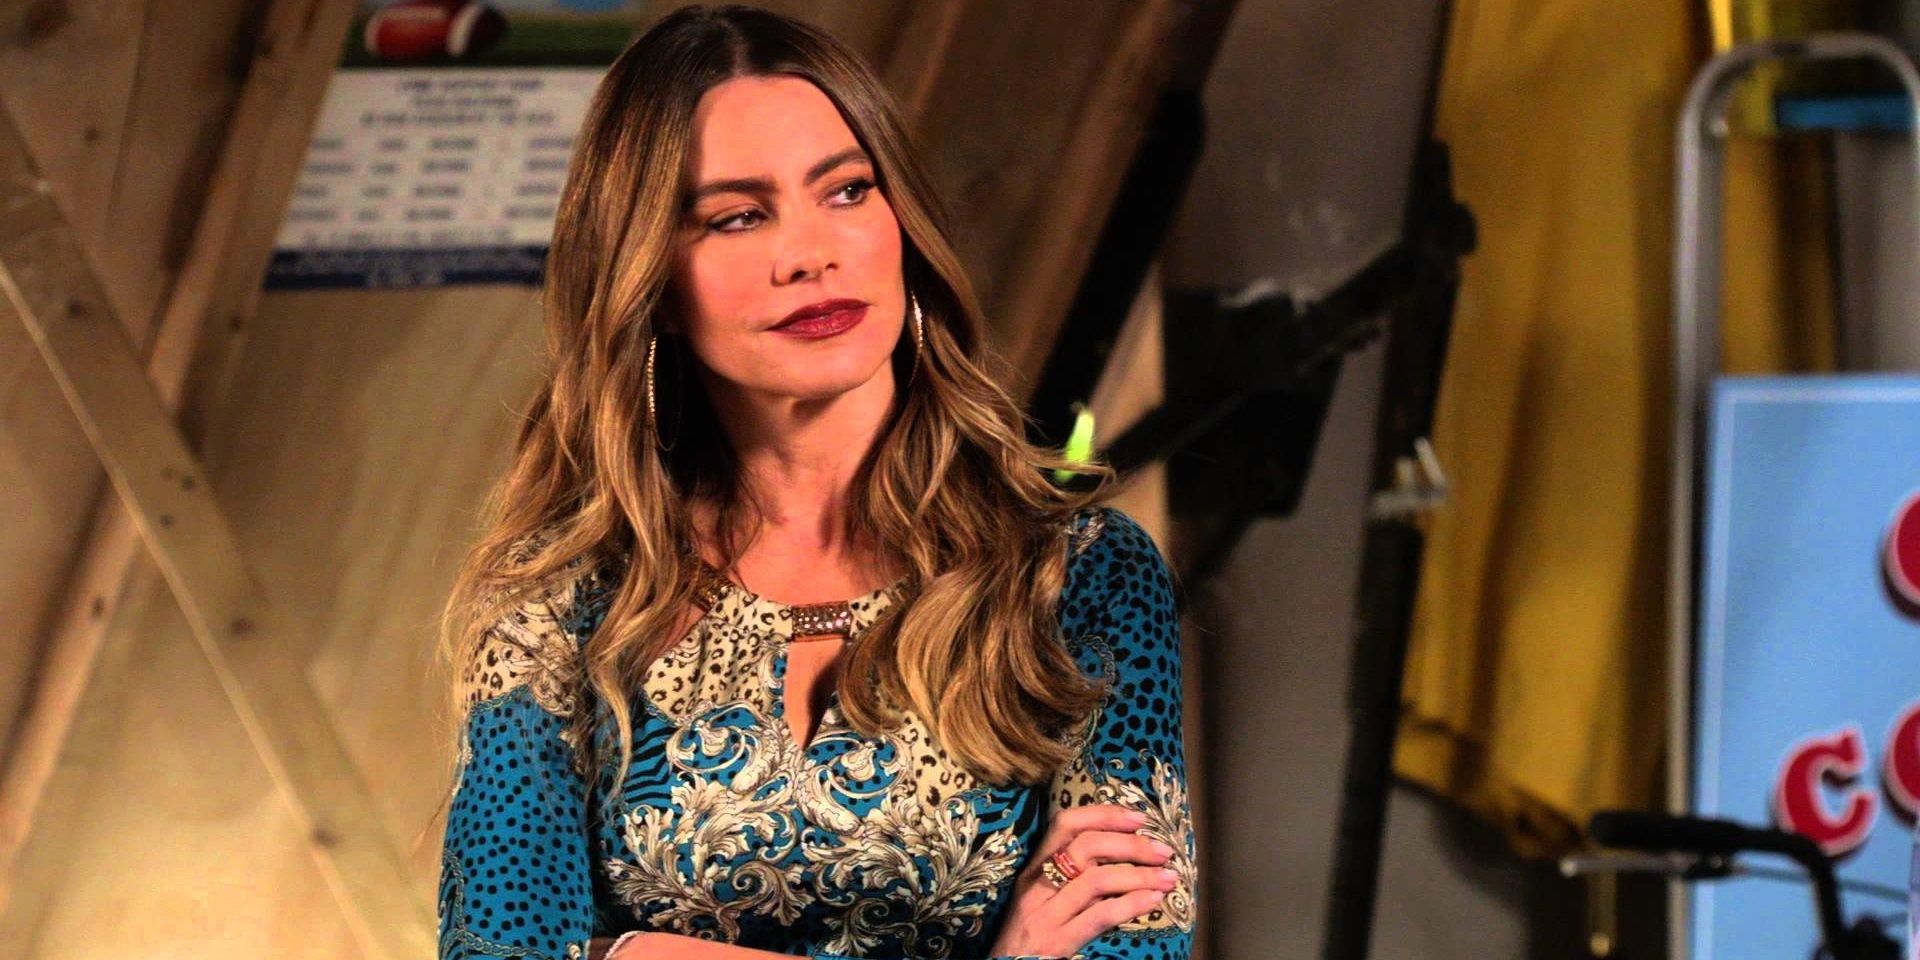 Sofia Vergara on 'Modern Family' and Being a Global Businesswoman